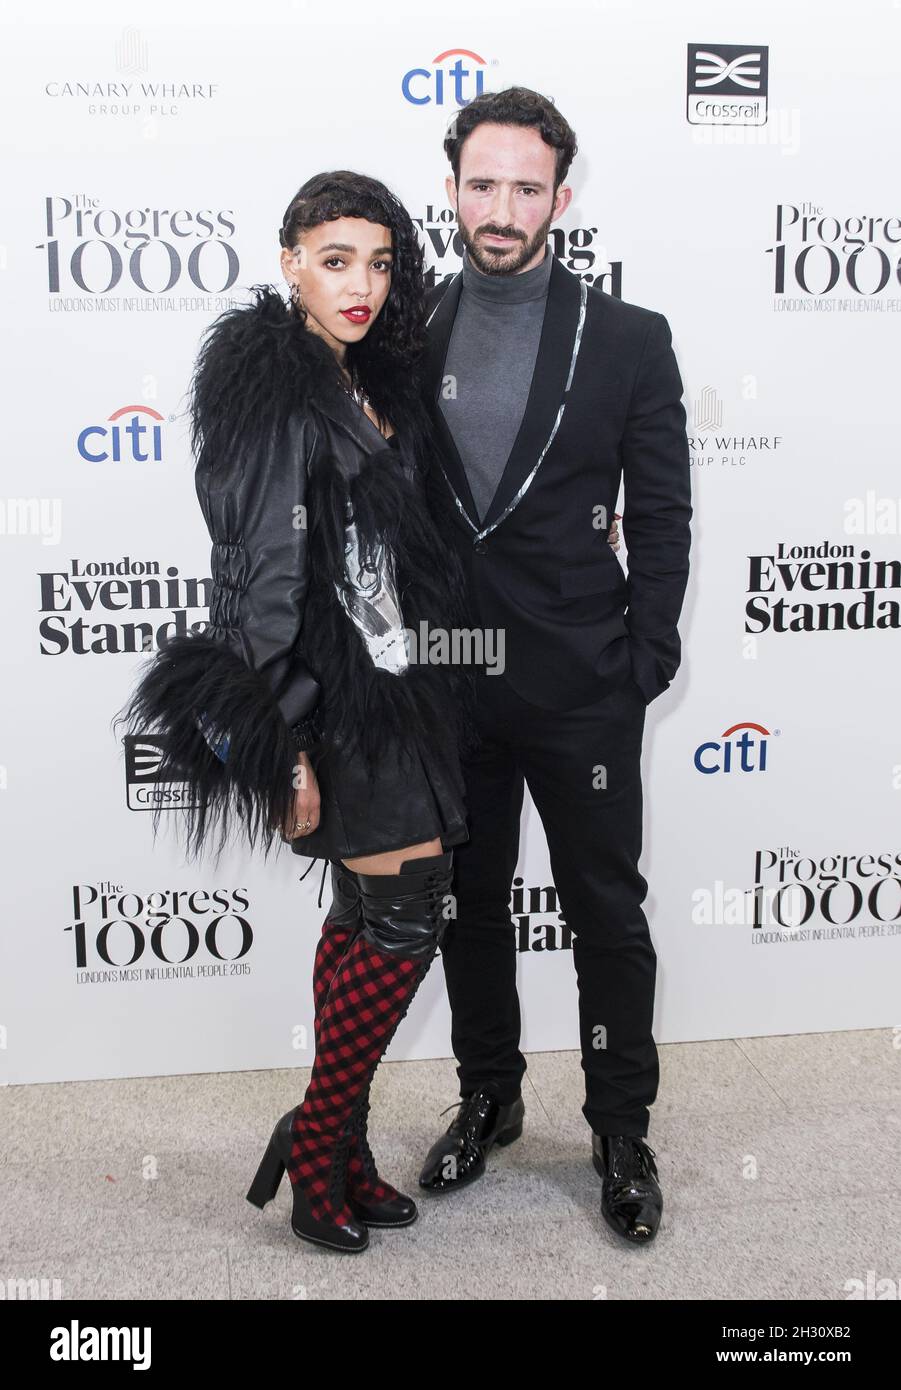 FKA Twigs and Aaron Sillis attends the London Evening Standard's launch of The Progress 1000 at Crossrail Station, Canary Wharf - London Stock Photo